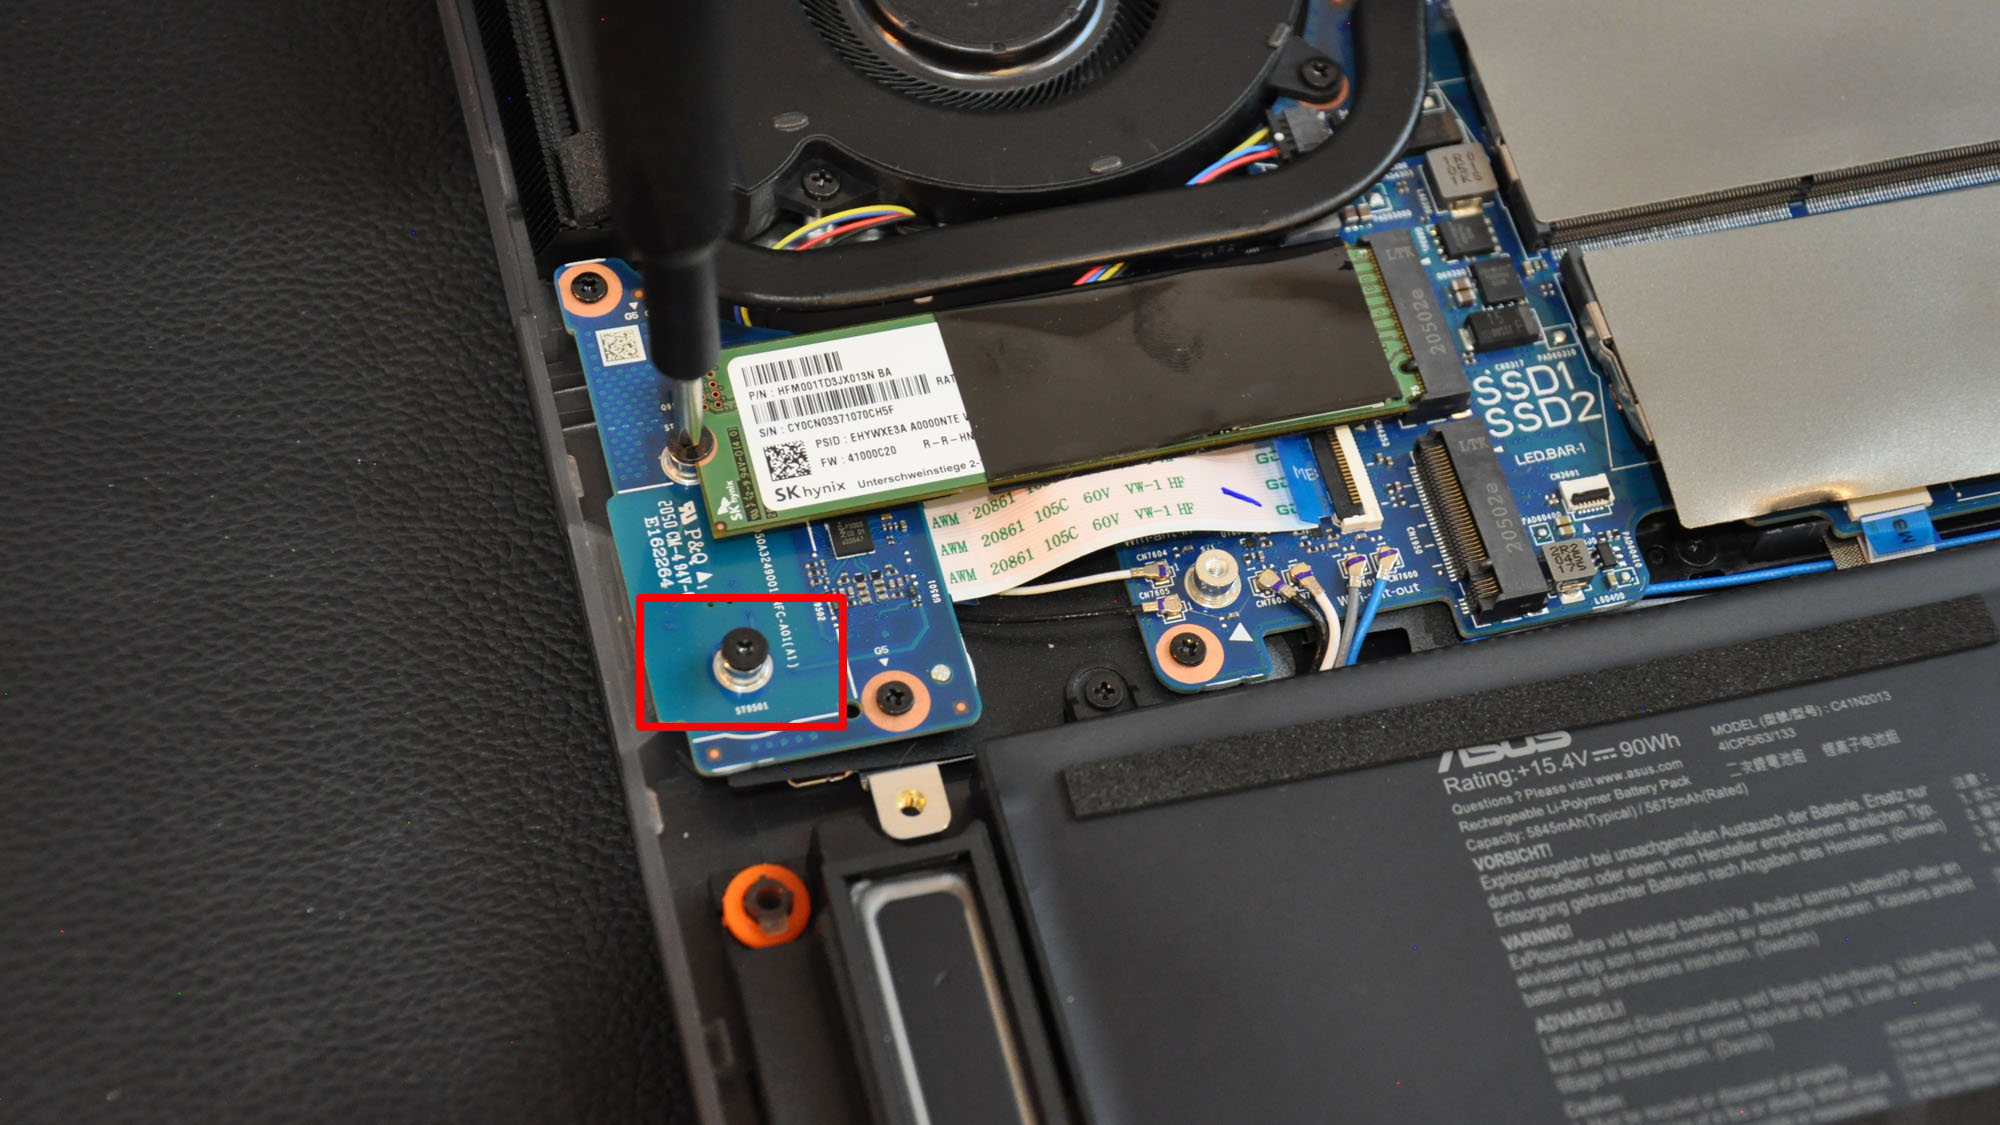 How to upgrade the RAM and SSD of your ROG Strix laptop